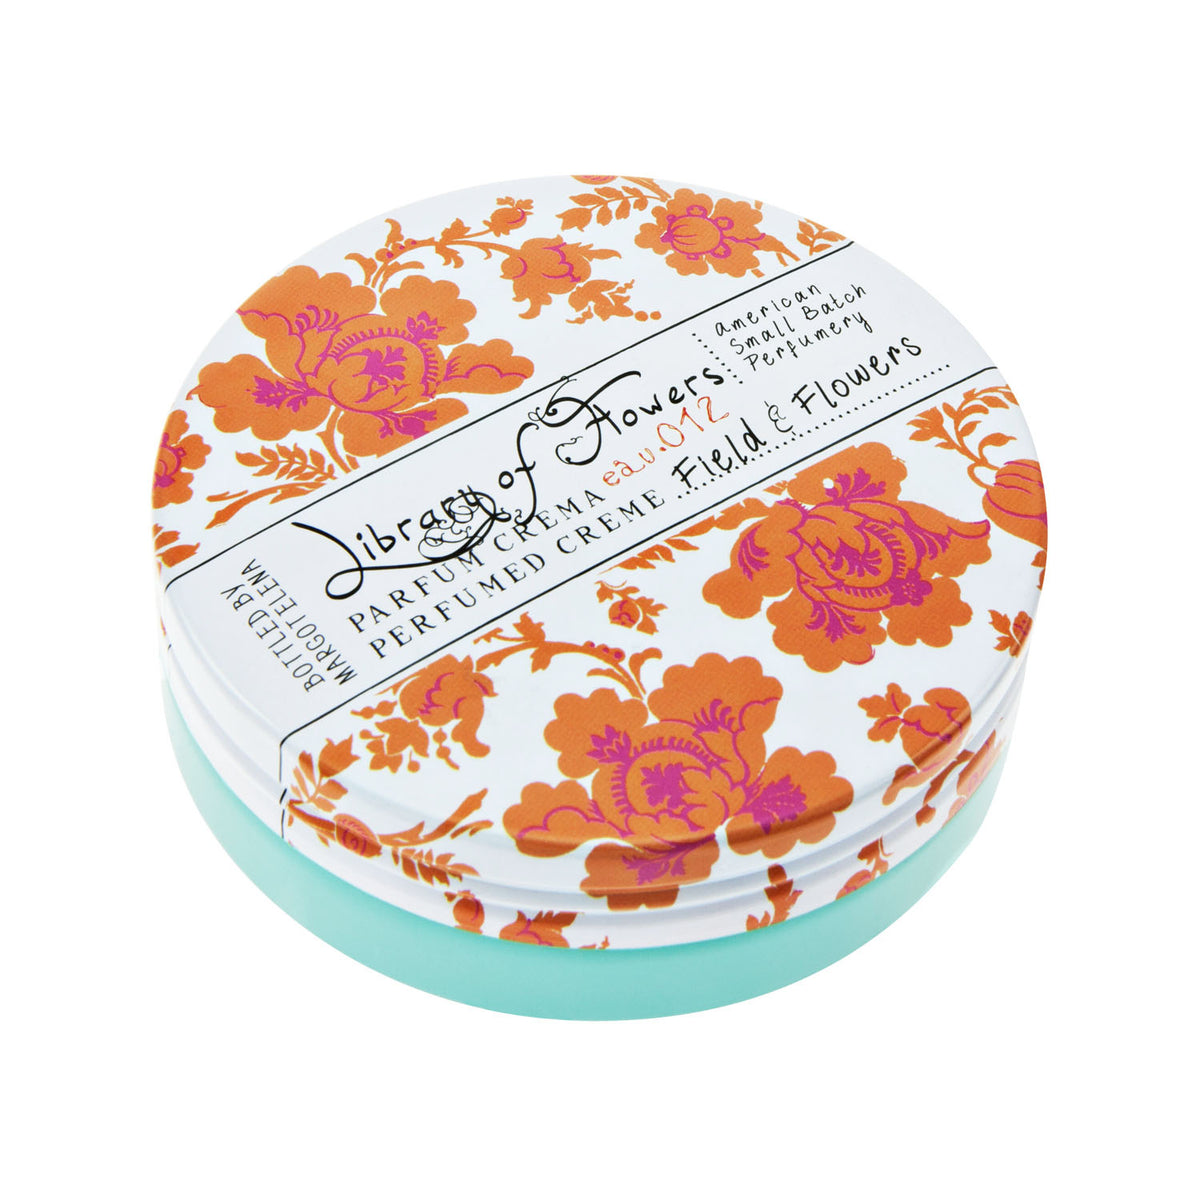 A round tin of Margot Elena Library of Flowers Field & Flowers Parfum Crema with an orange floral design on the lid and teal base. The label displays the scent as "Field & Flowers.